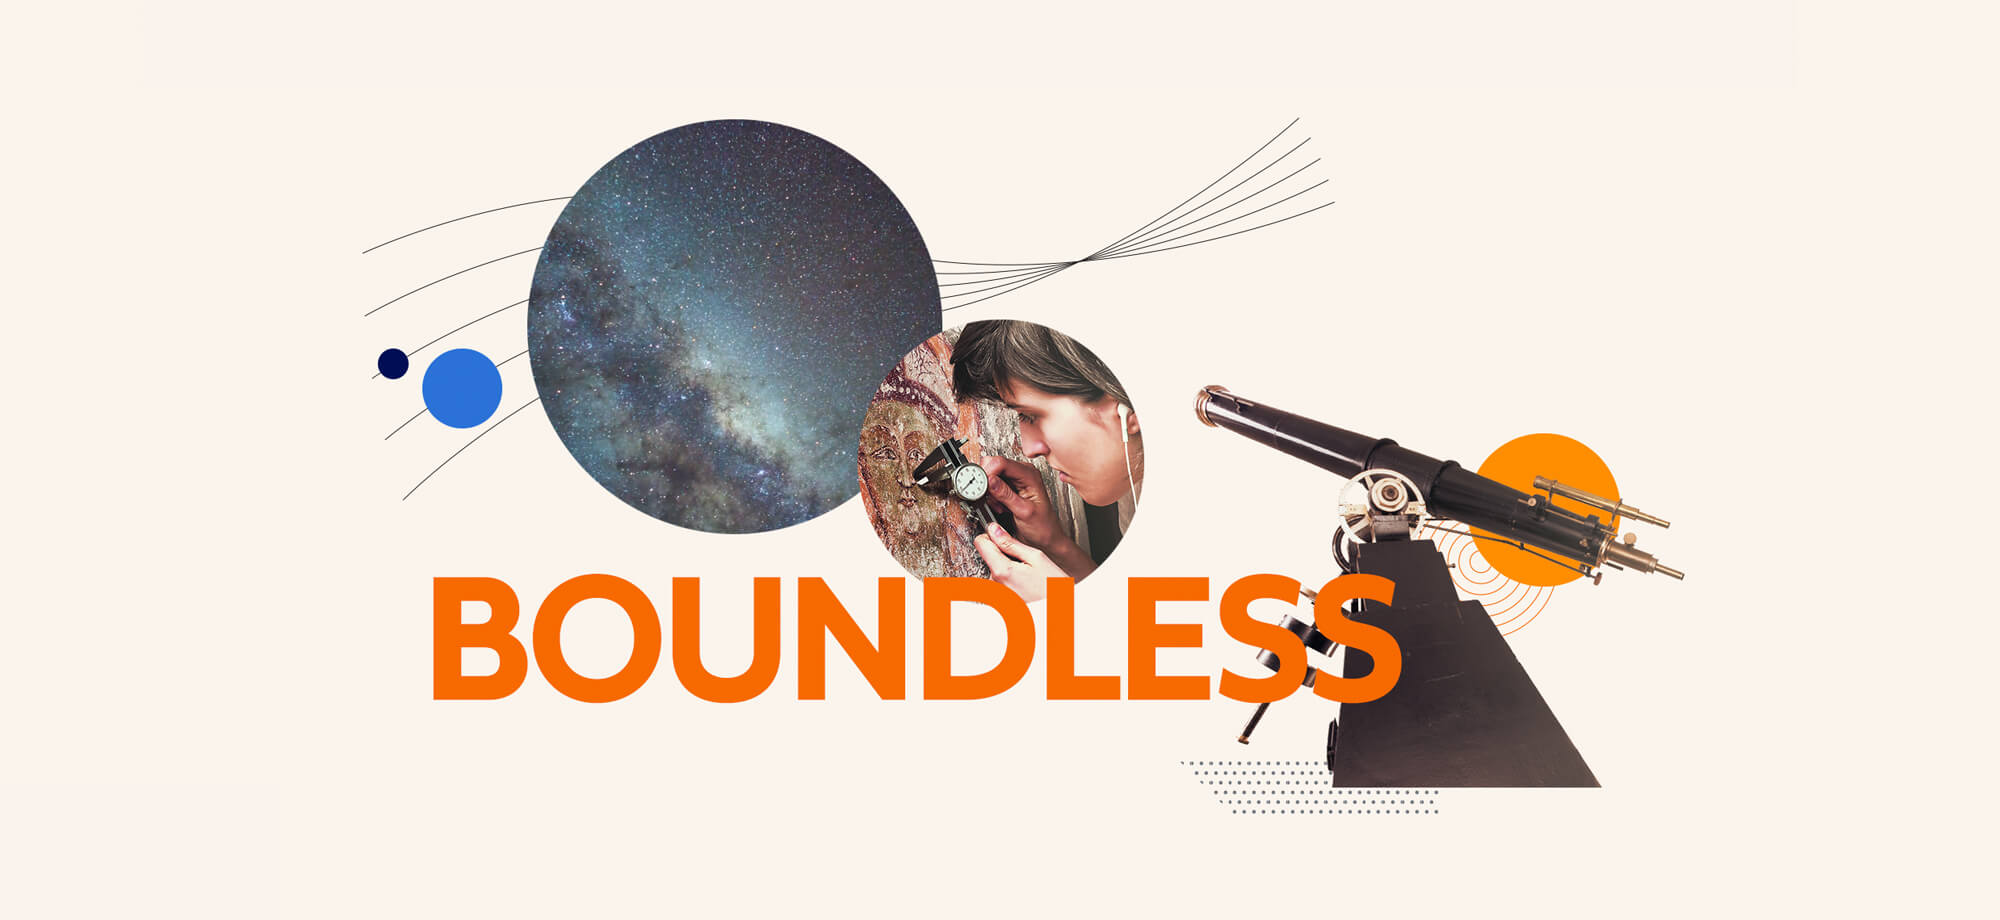 A&S Boundless collage